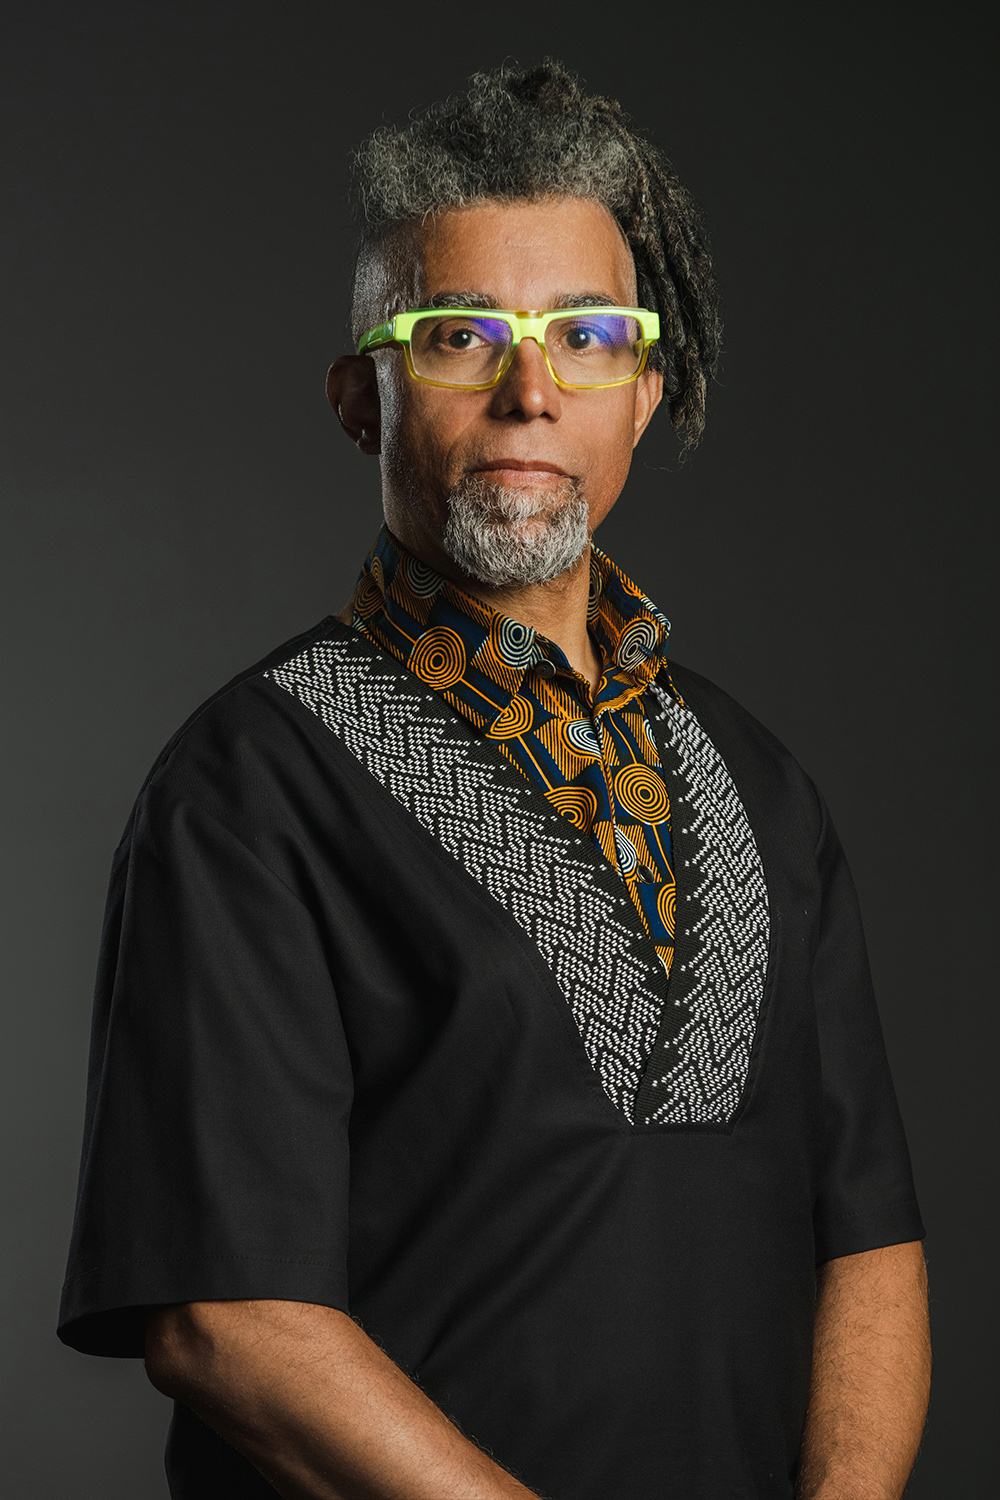 Color photograph of a dark skinned man with gray dreadlocks and goatee wearing glasses and an African inspired shirt, looking directly at the camera